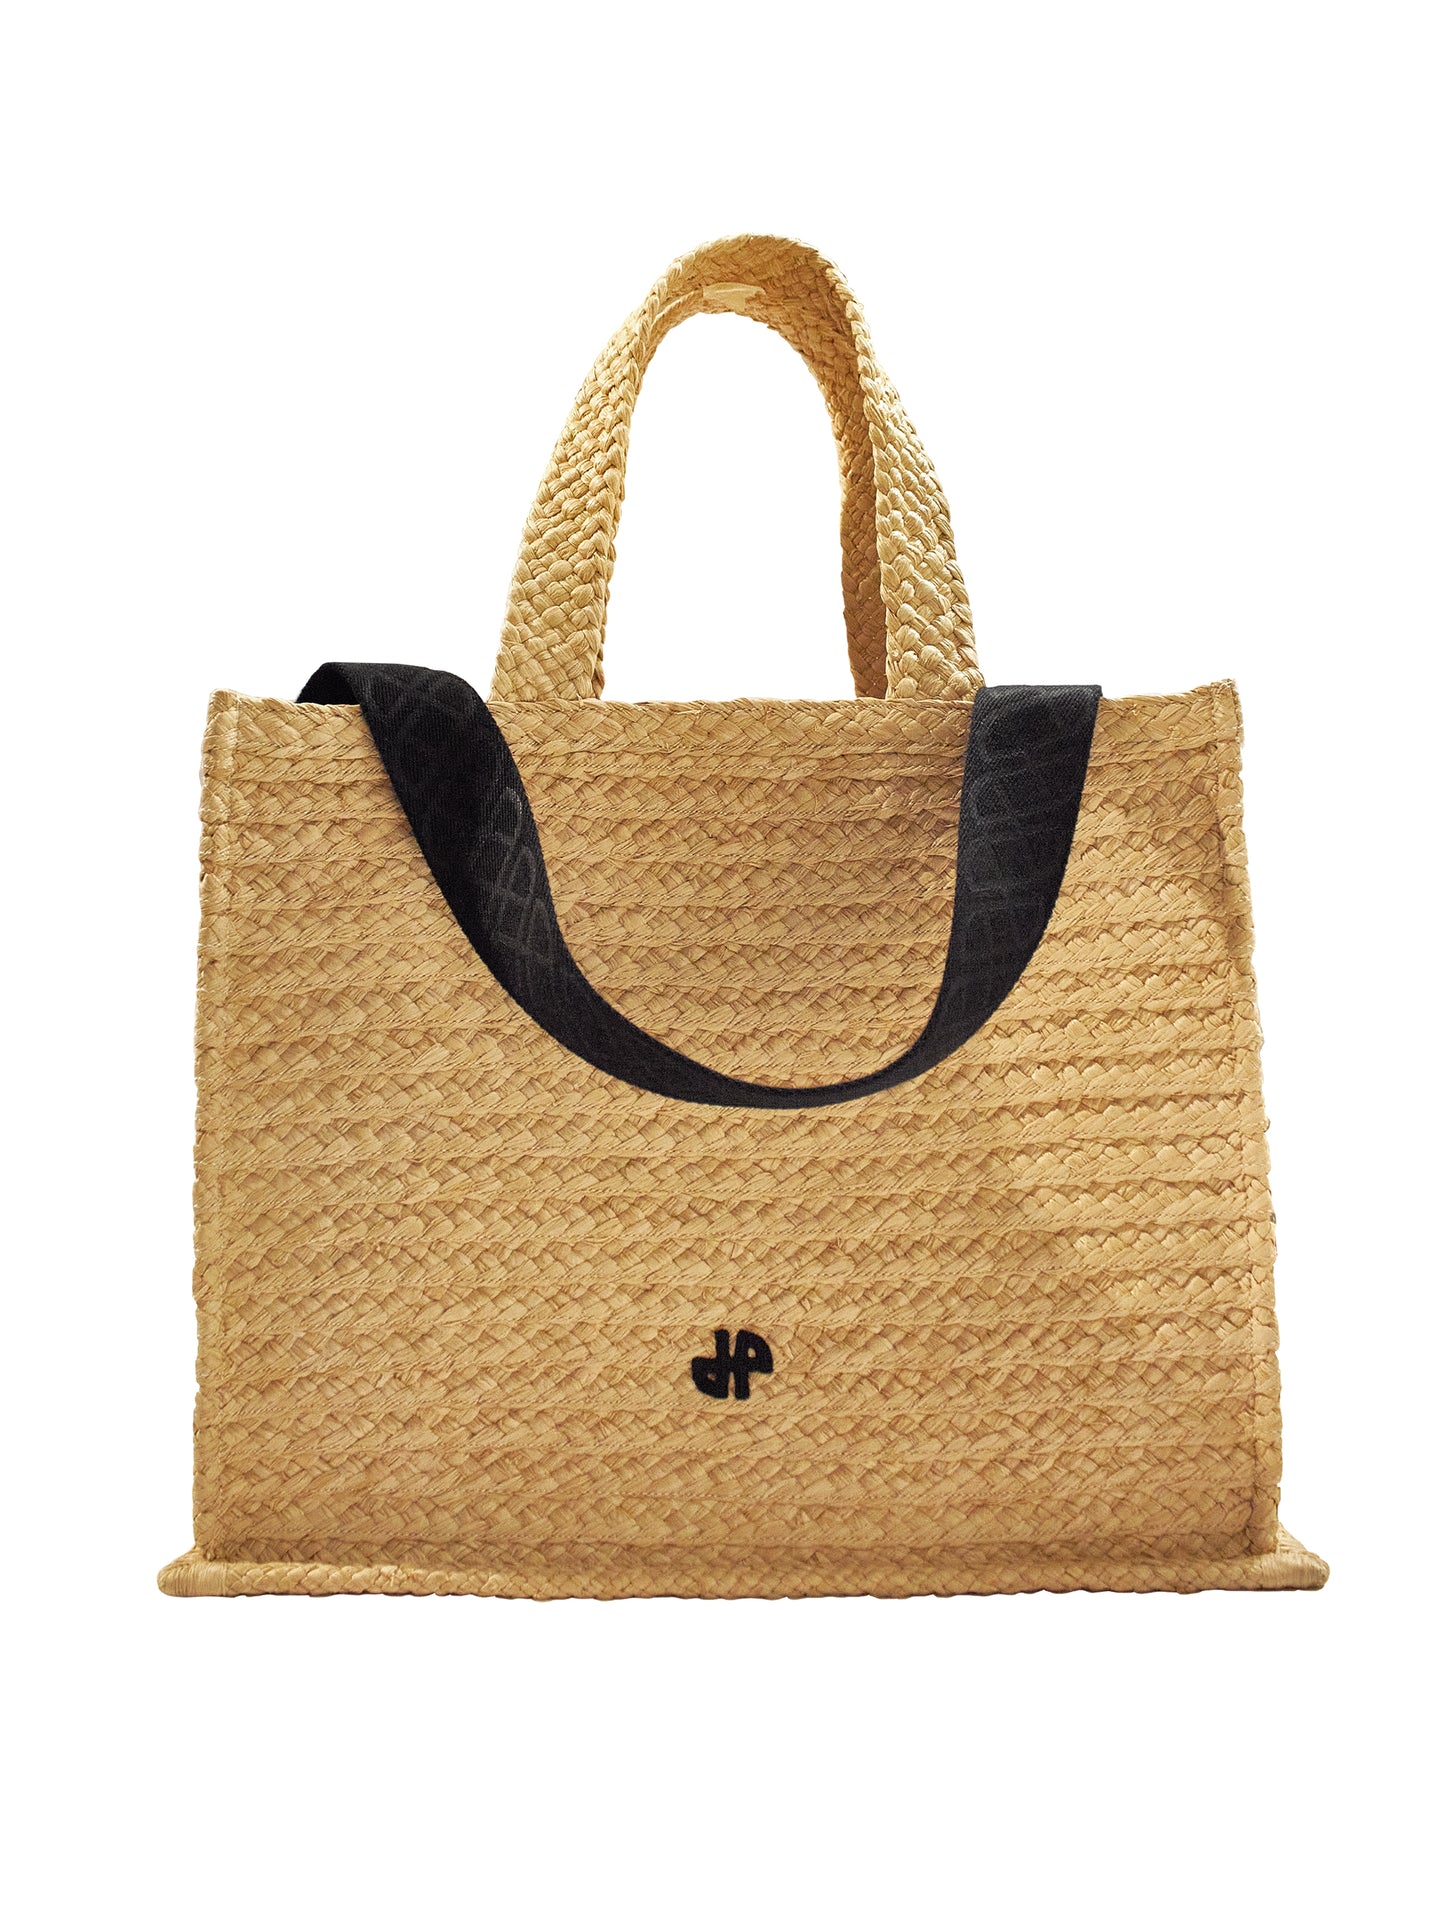 Patou Tasche Tote Large Vanille